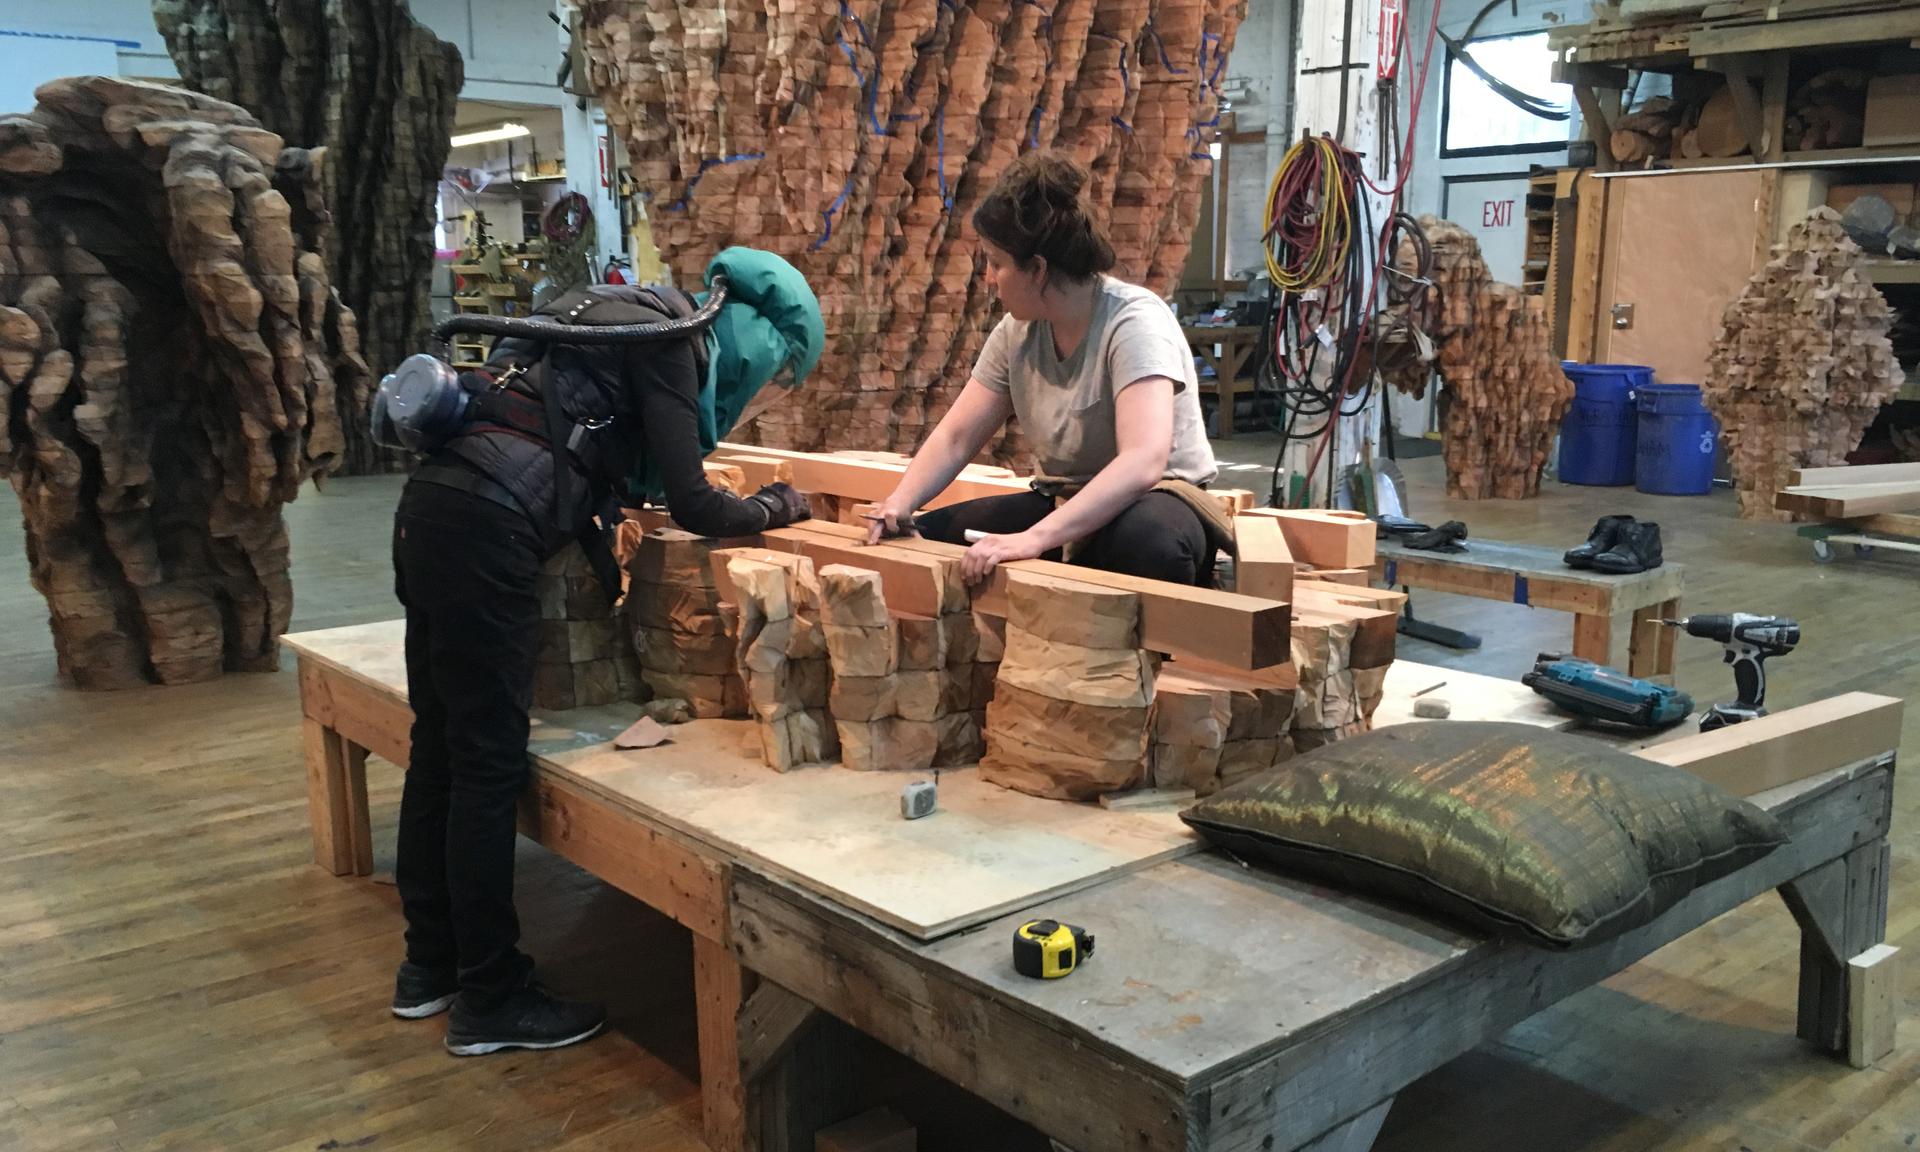 Ursula von Rydingsvard at work in her studio, with assistant Morgan Daly.